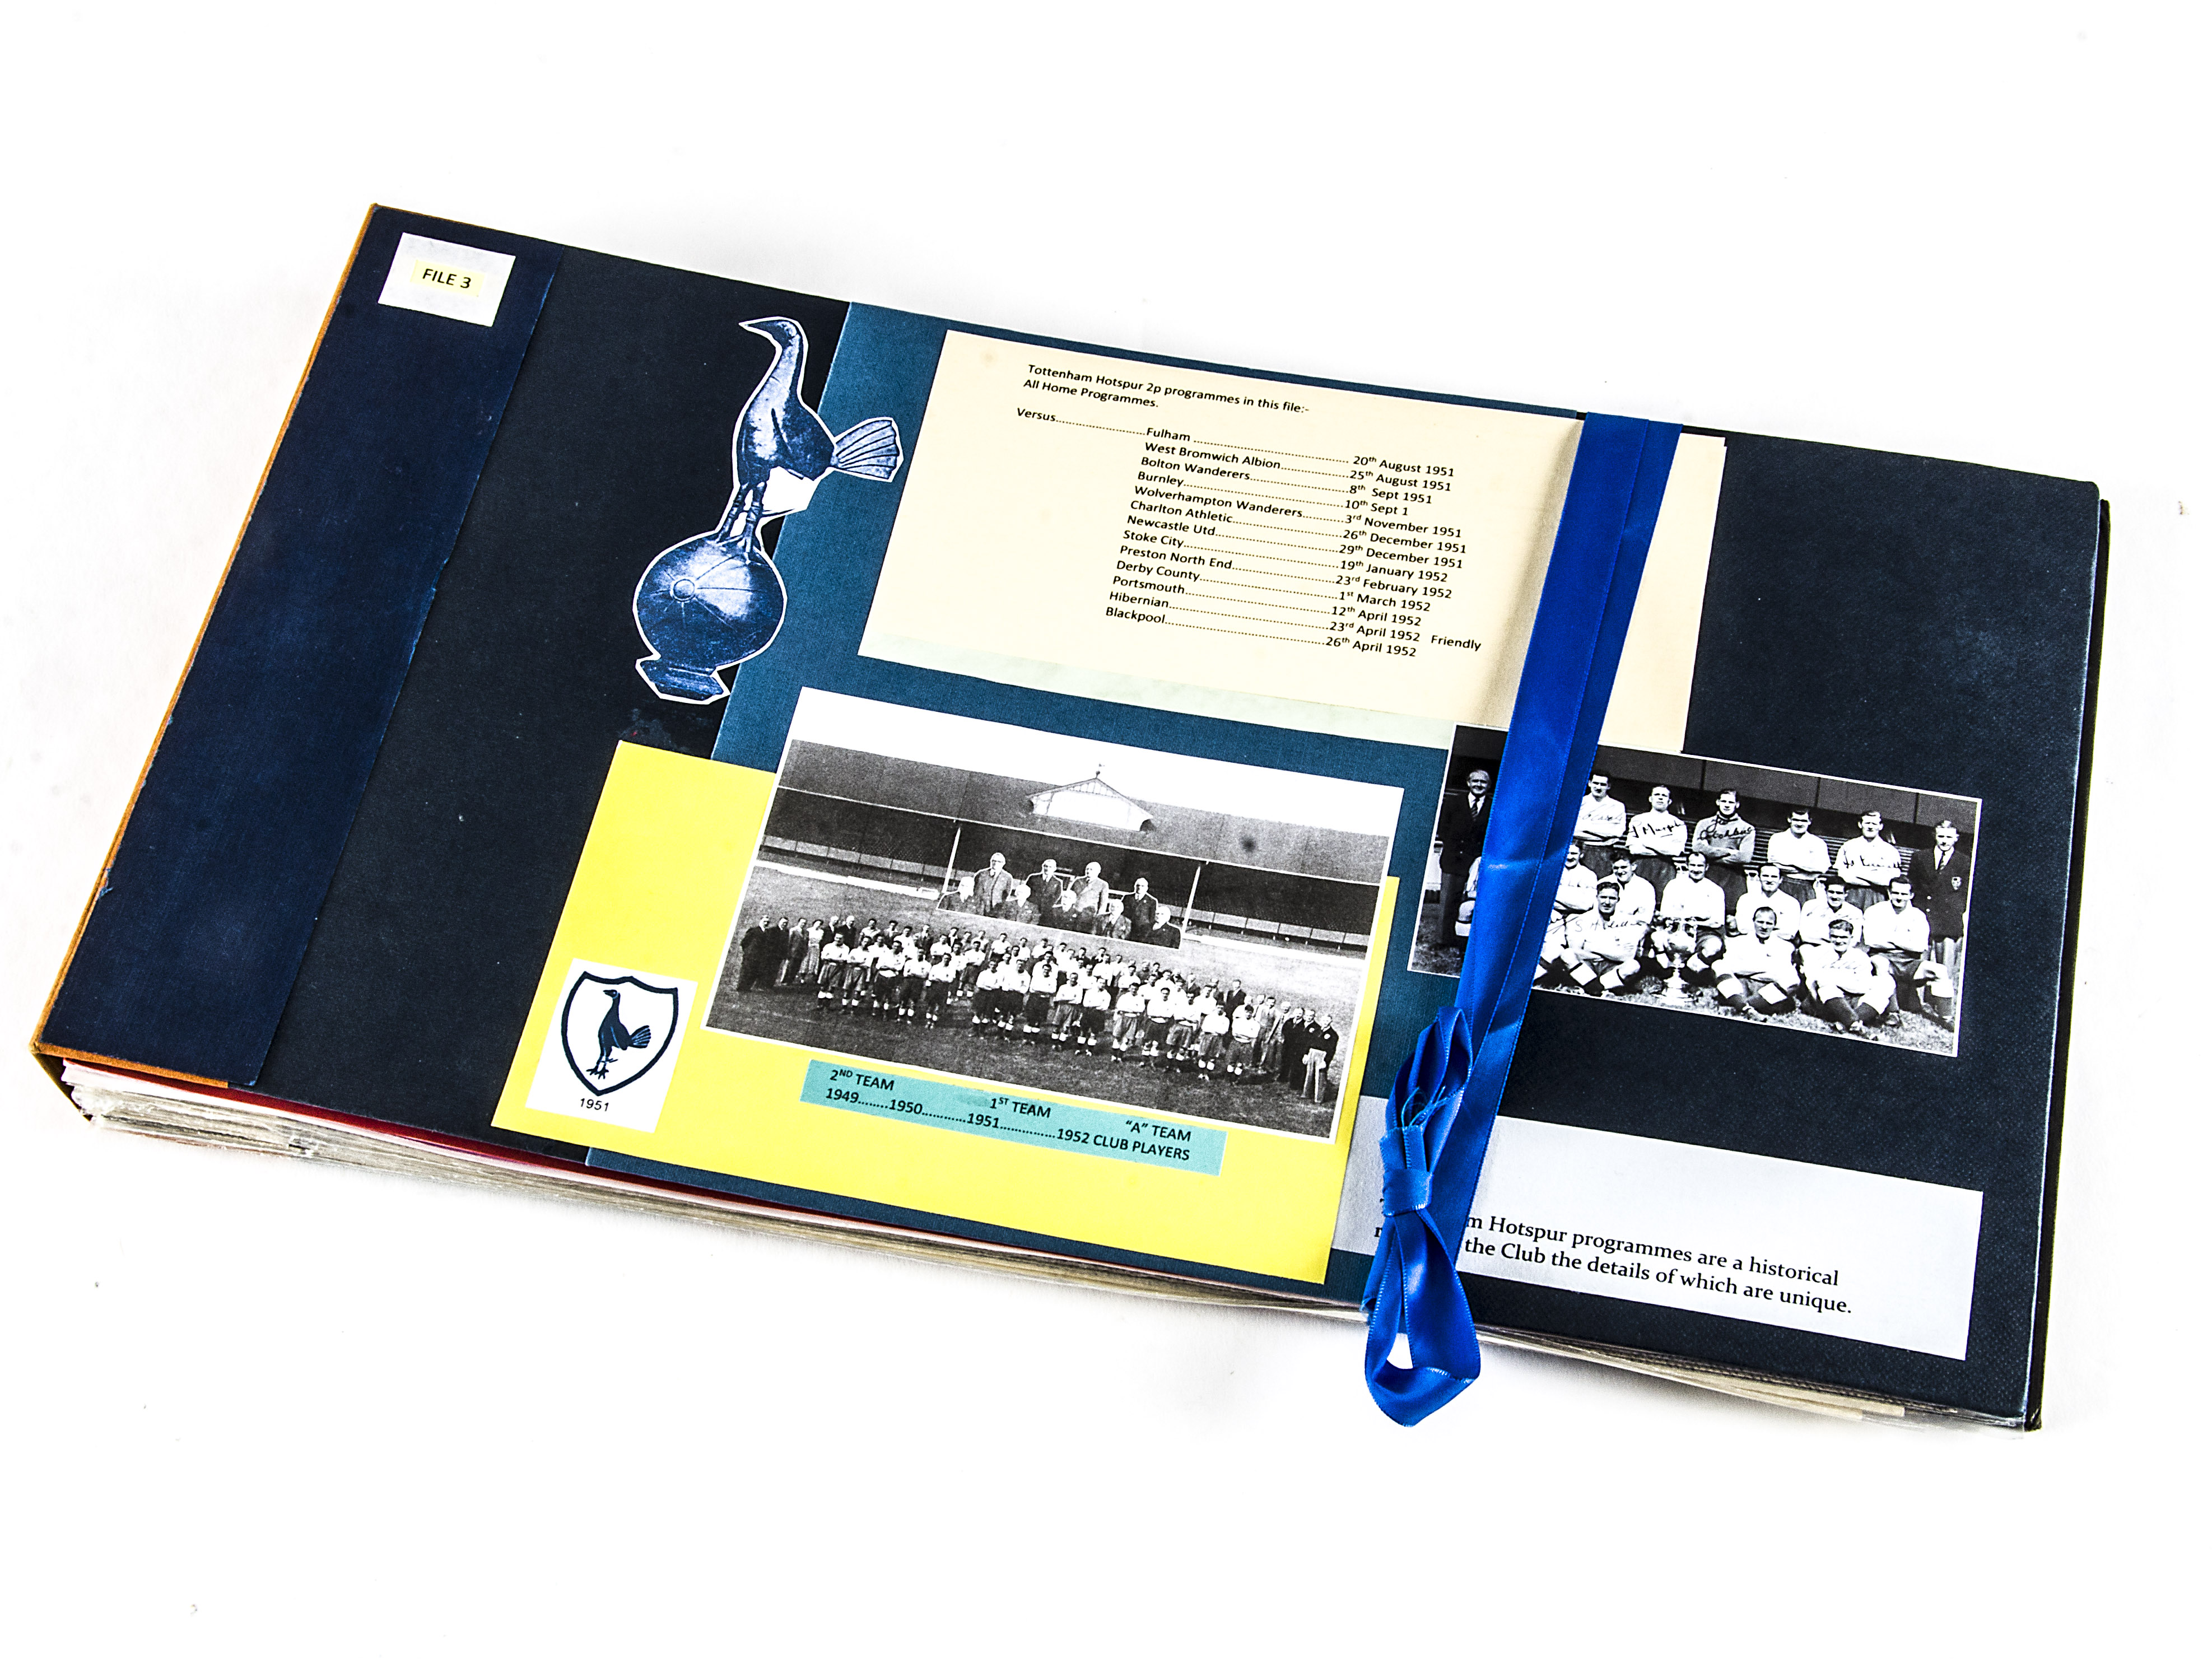 Tottenham Hotspur Programmes, home programmes 1951 and 1952 that include from 1951 Fulham, West